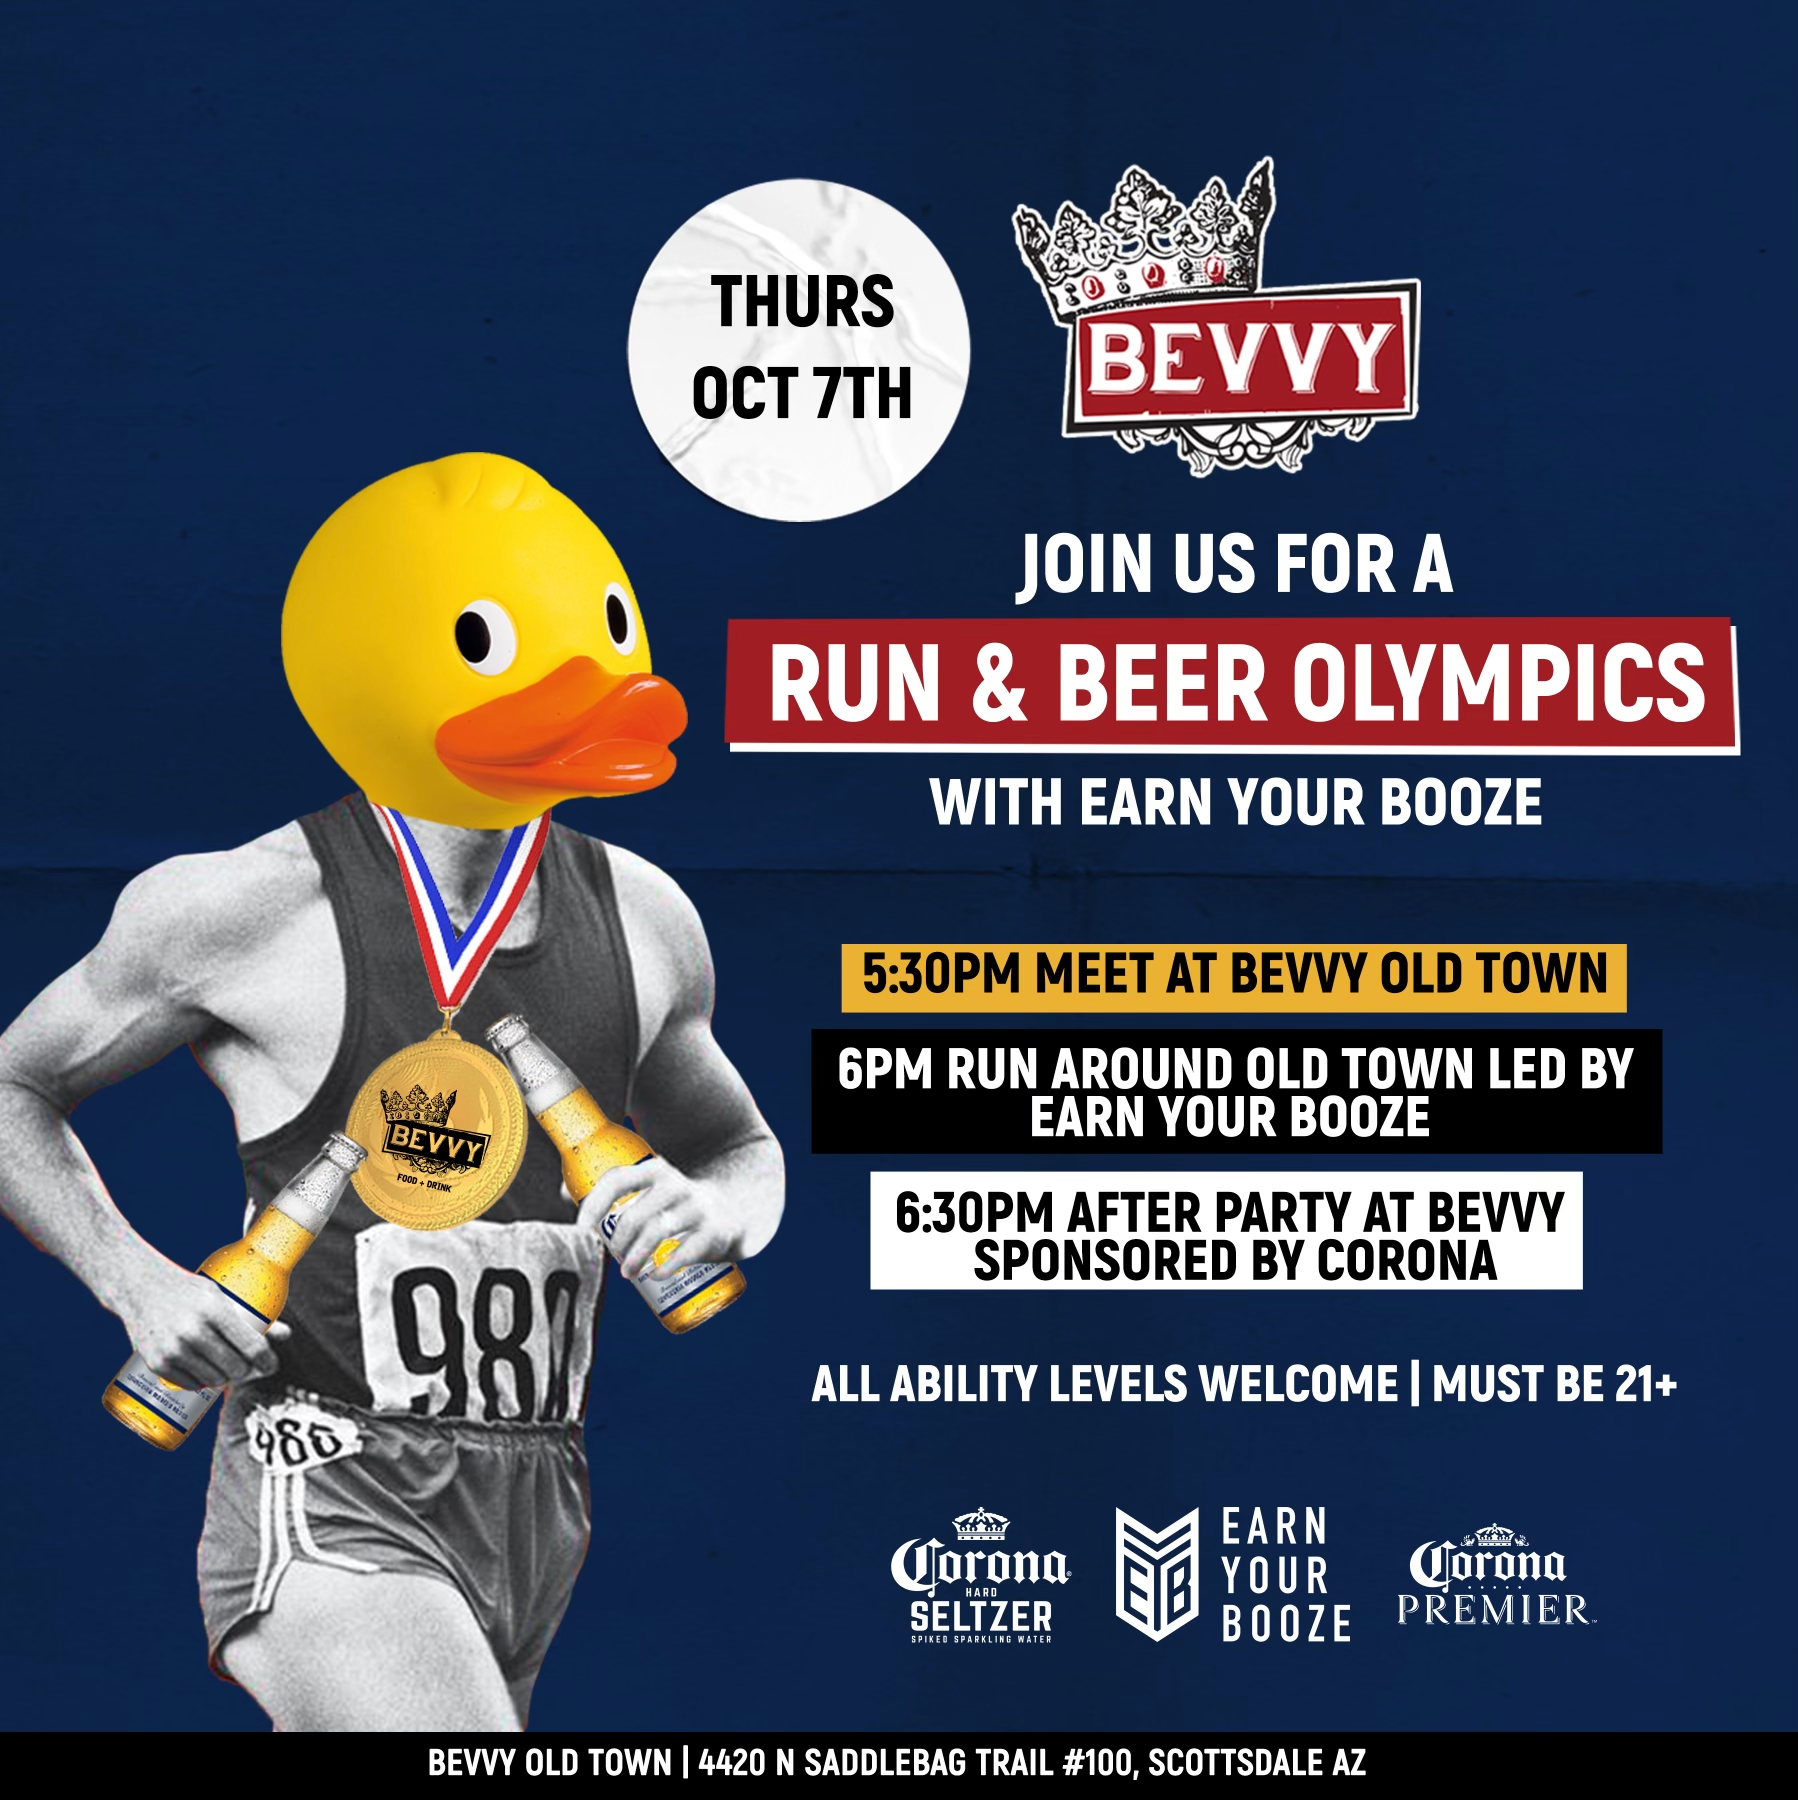 BEER OLYMPICS @ BEVVY OLD TOWN | OCT 7th